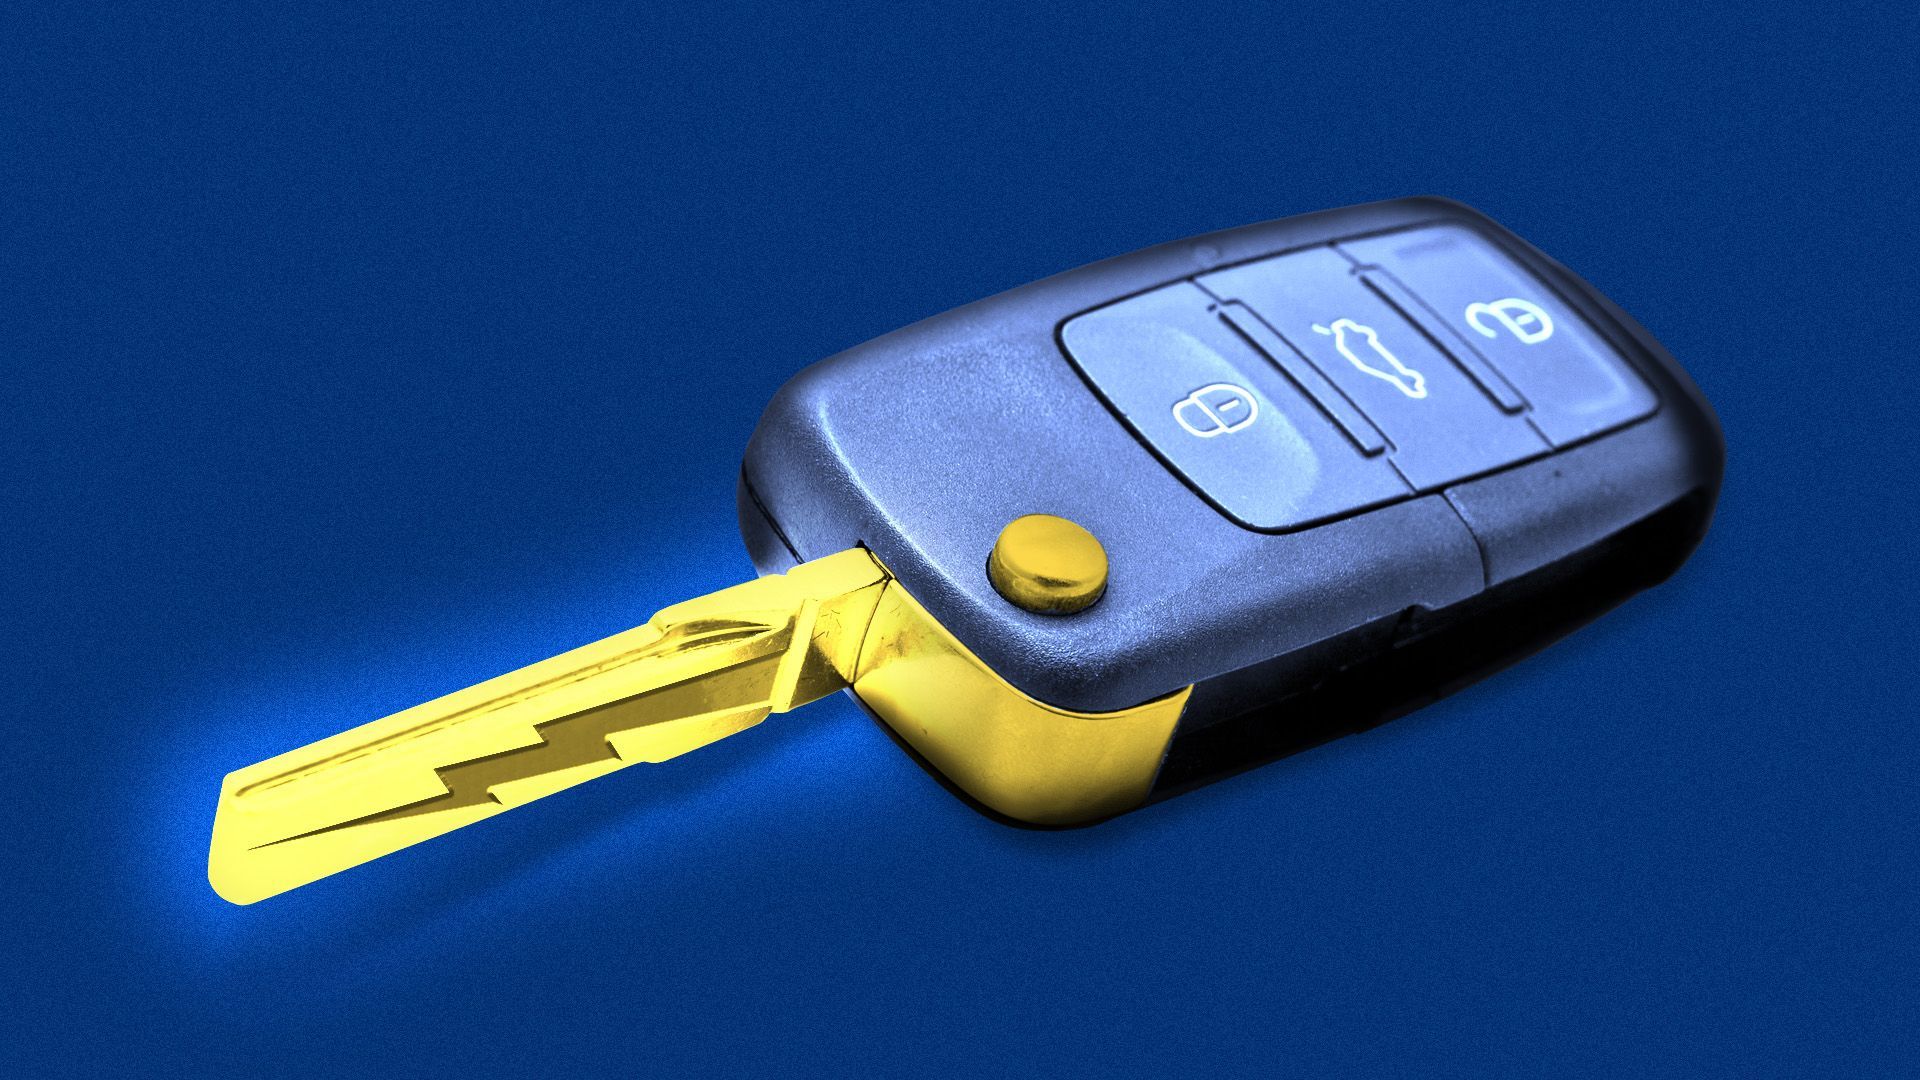 Illustration of a car key with a glowing lightning bolt